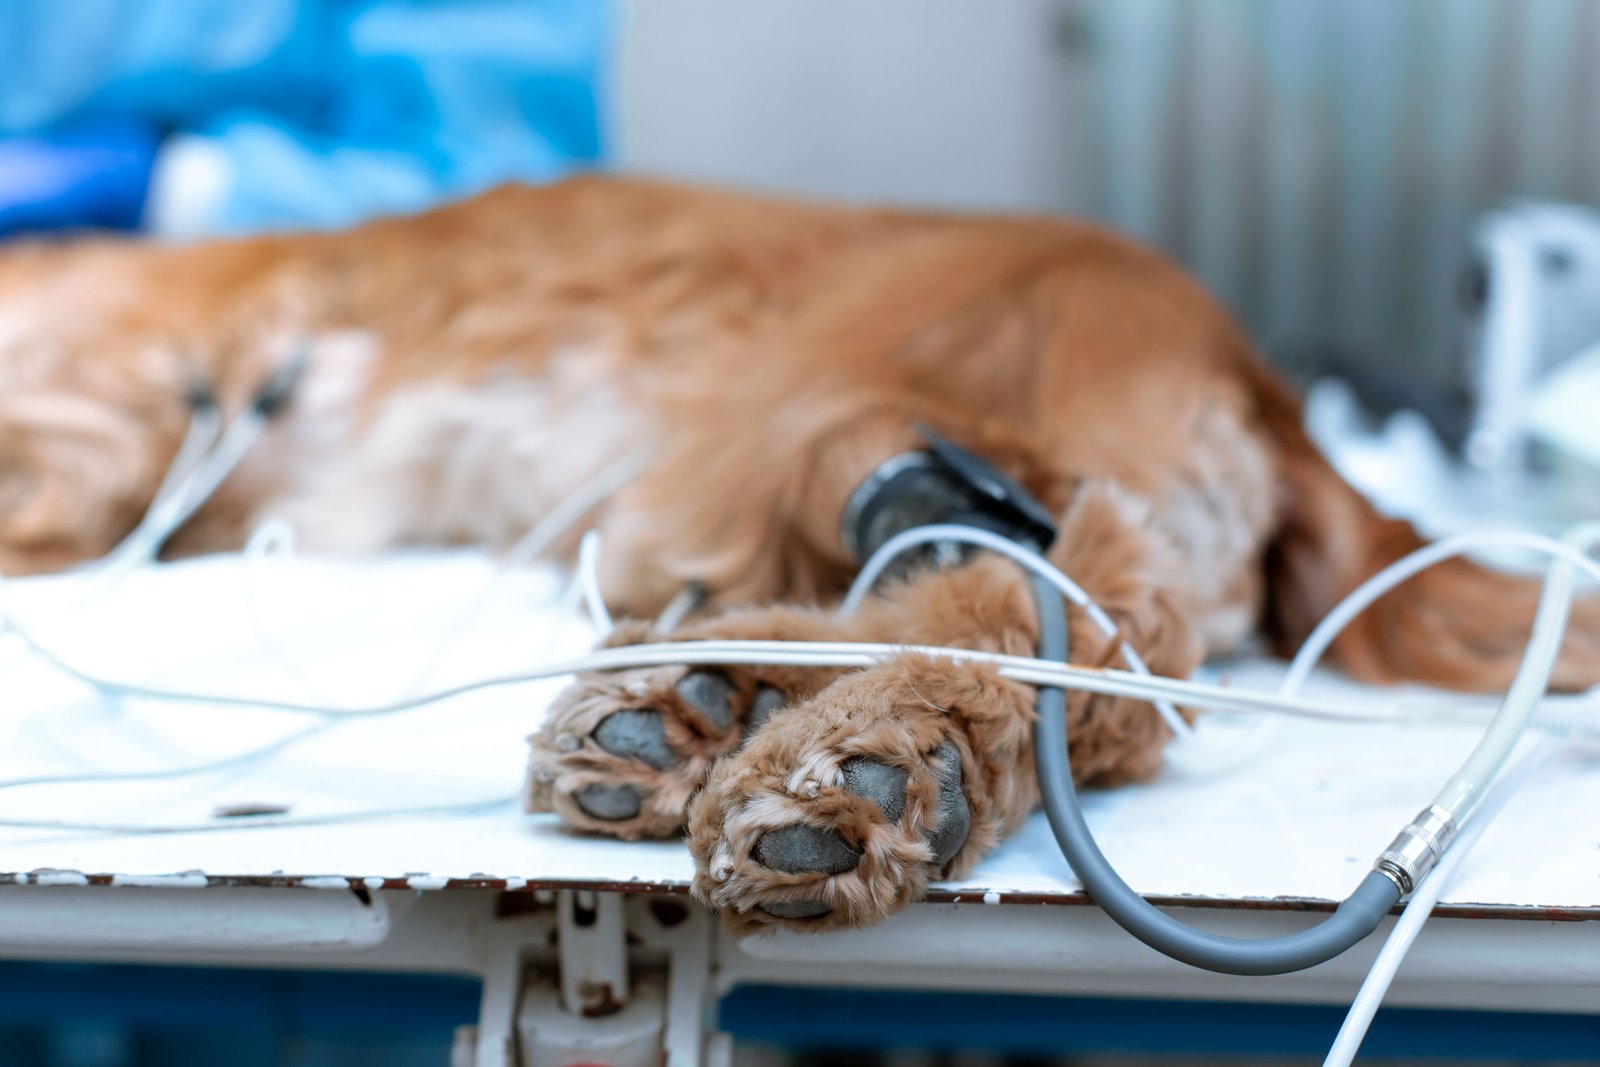 the dog is anesthetized on the operating table in a veterinary clinic.